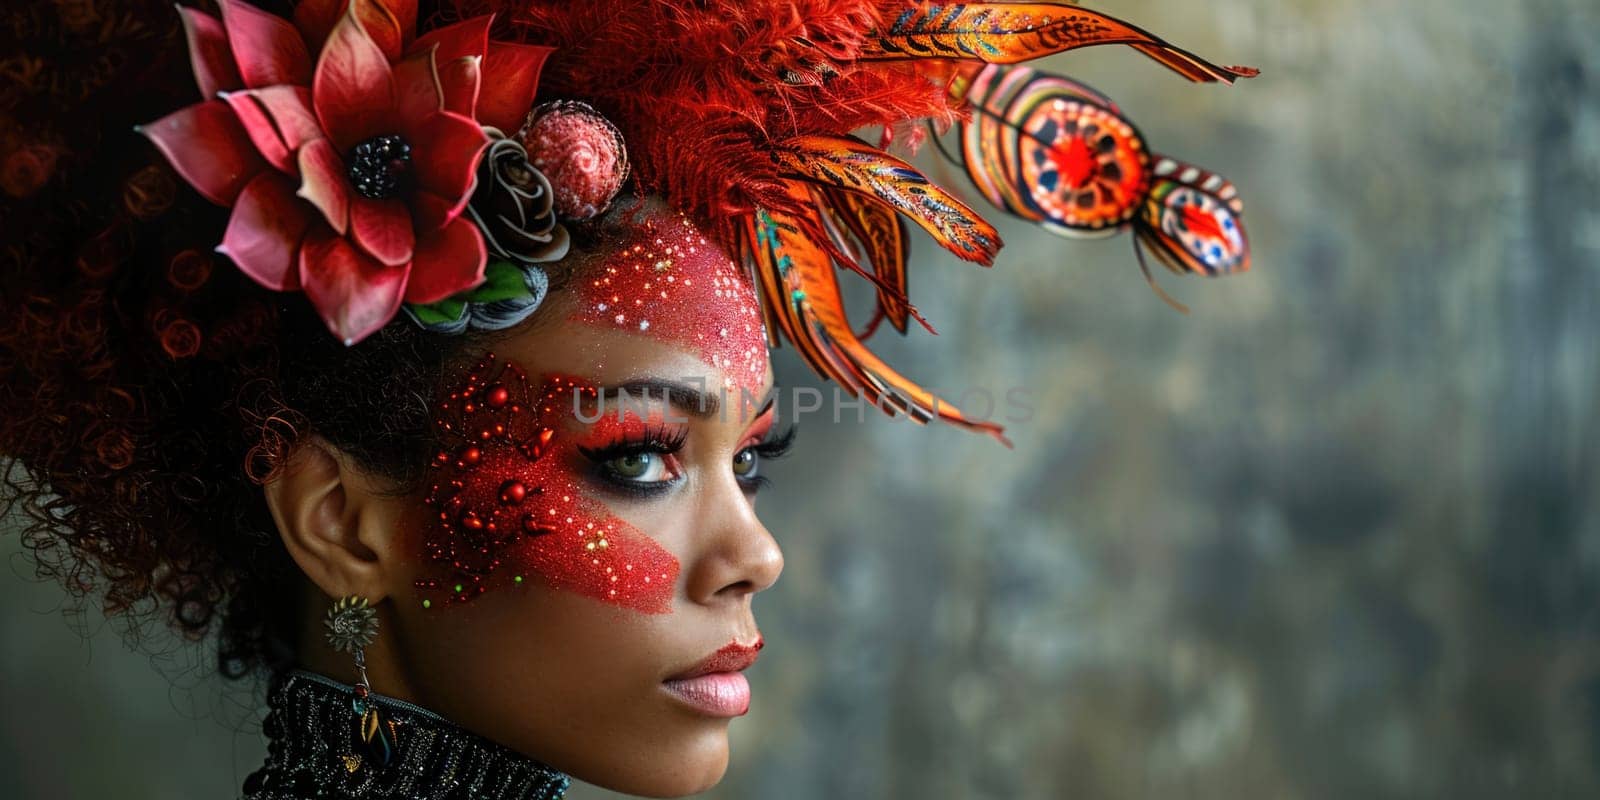 Woman With Red Makeup and Feathered Headdress by but_photo